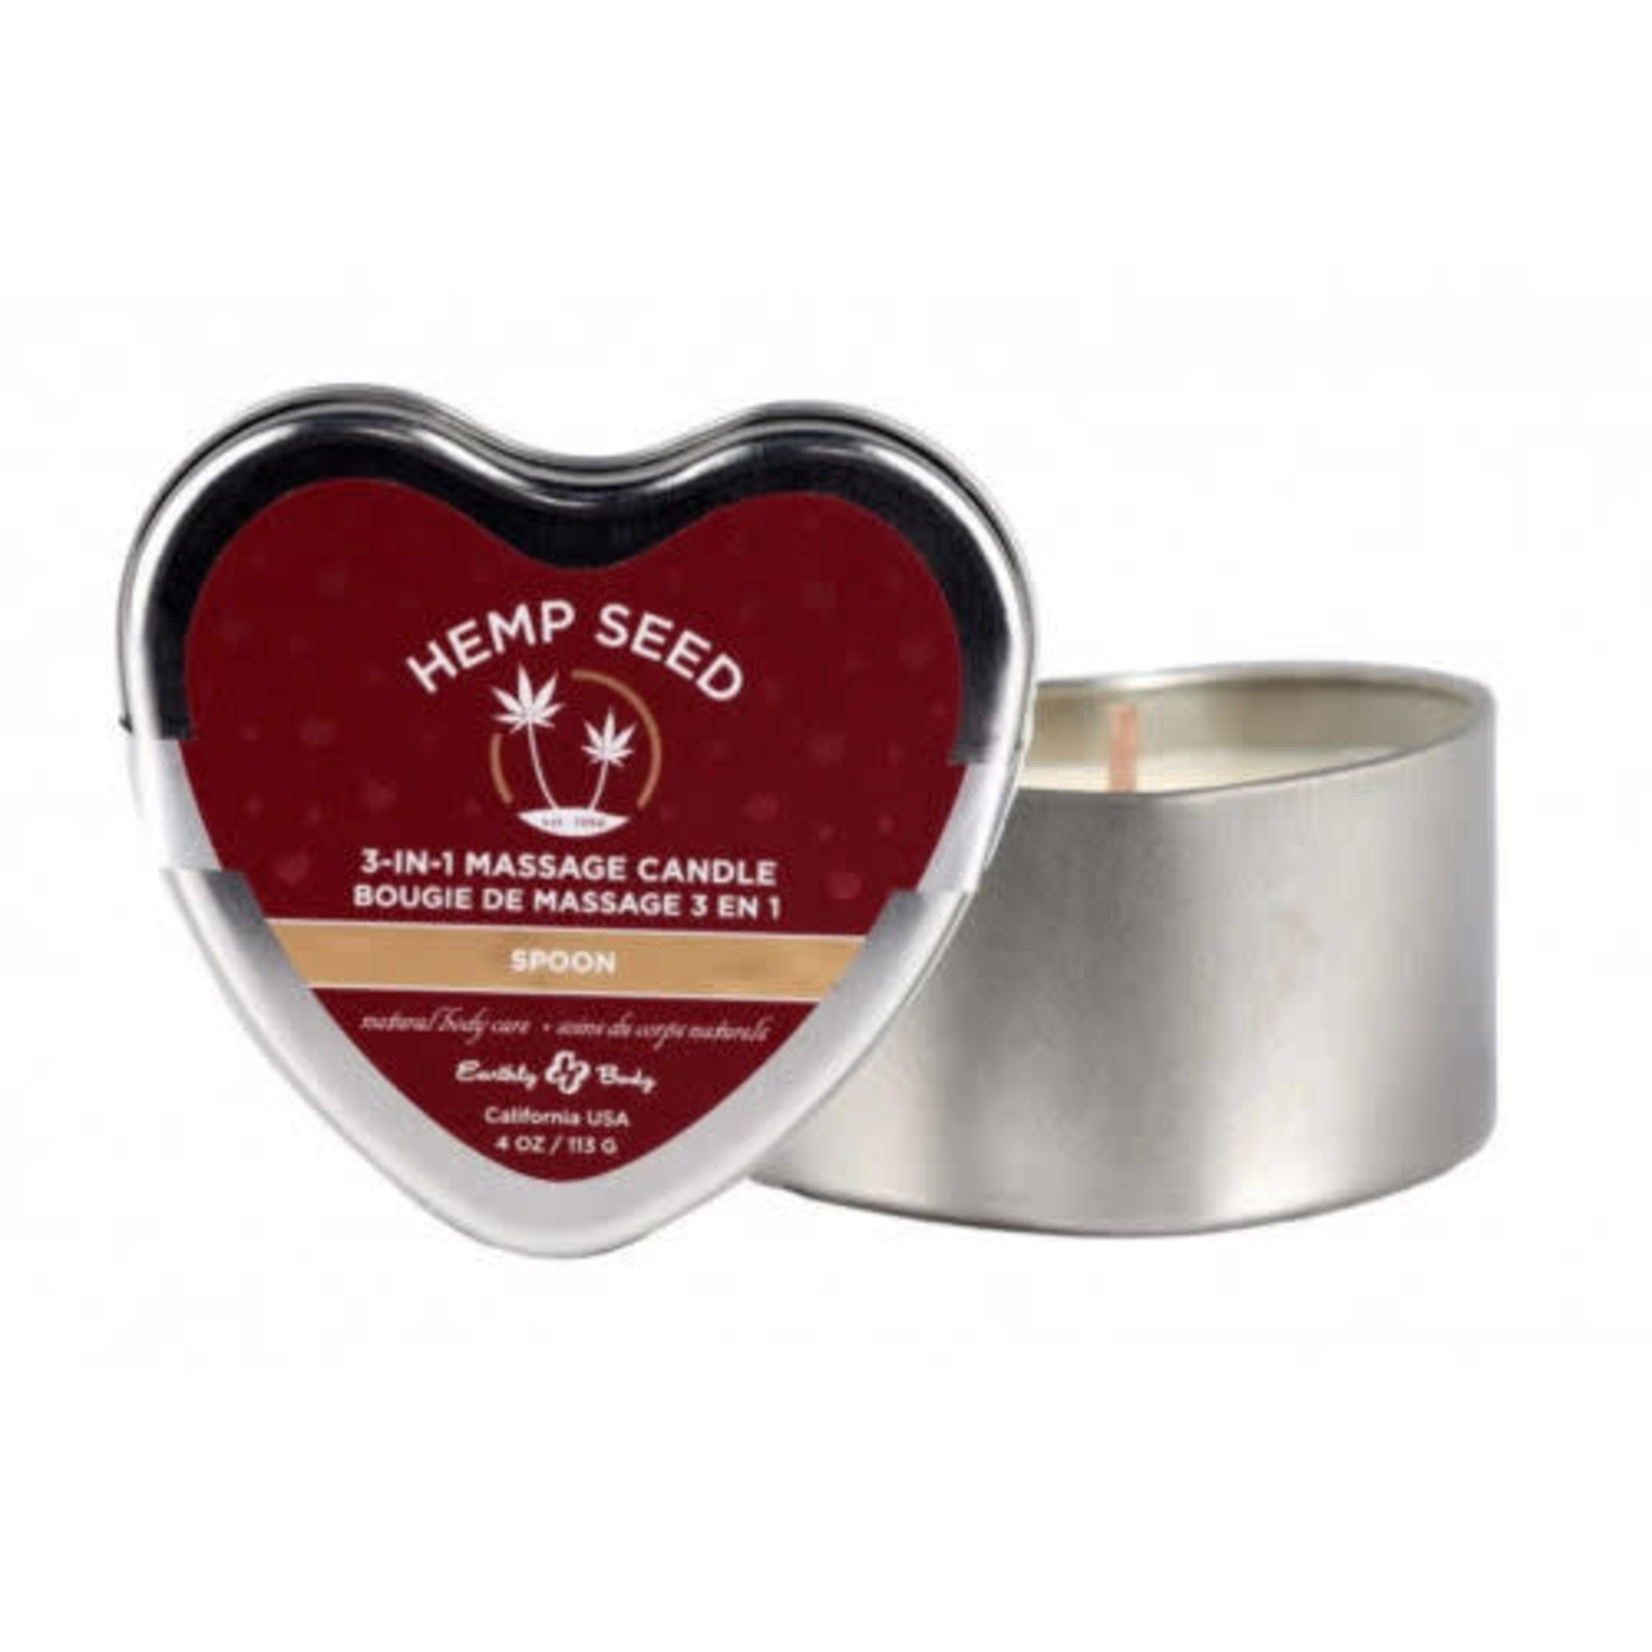 EARTHLY BODY EARTHLY BODY - 3-IN-1 MASSAGE CANDLE 4OZ/113G IN SPOON